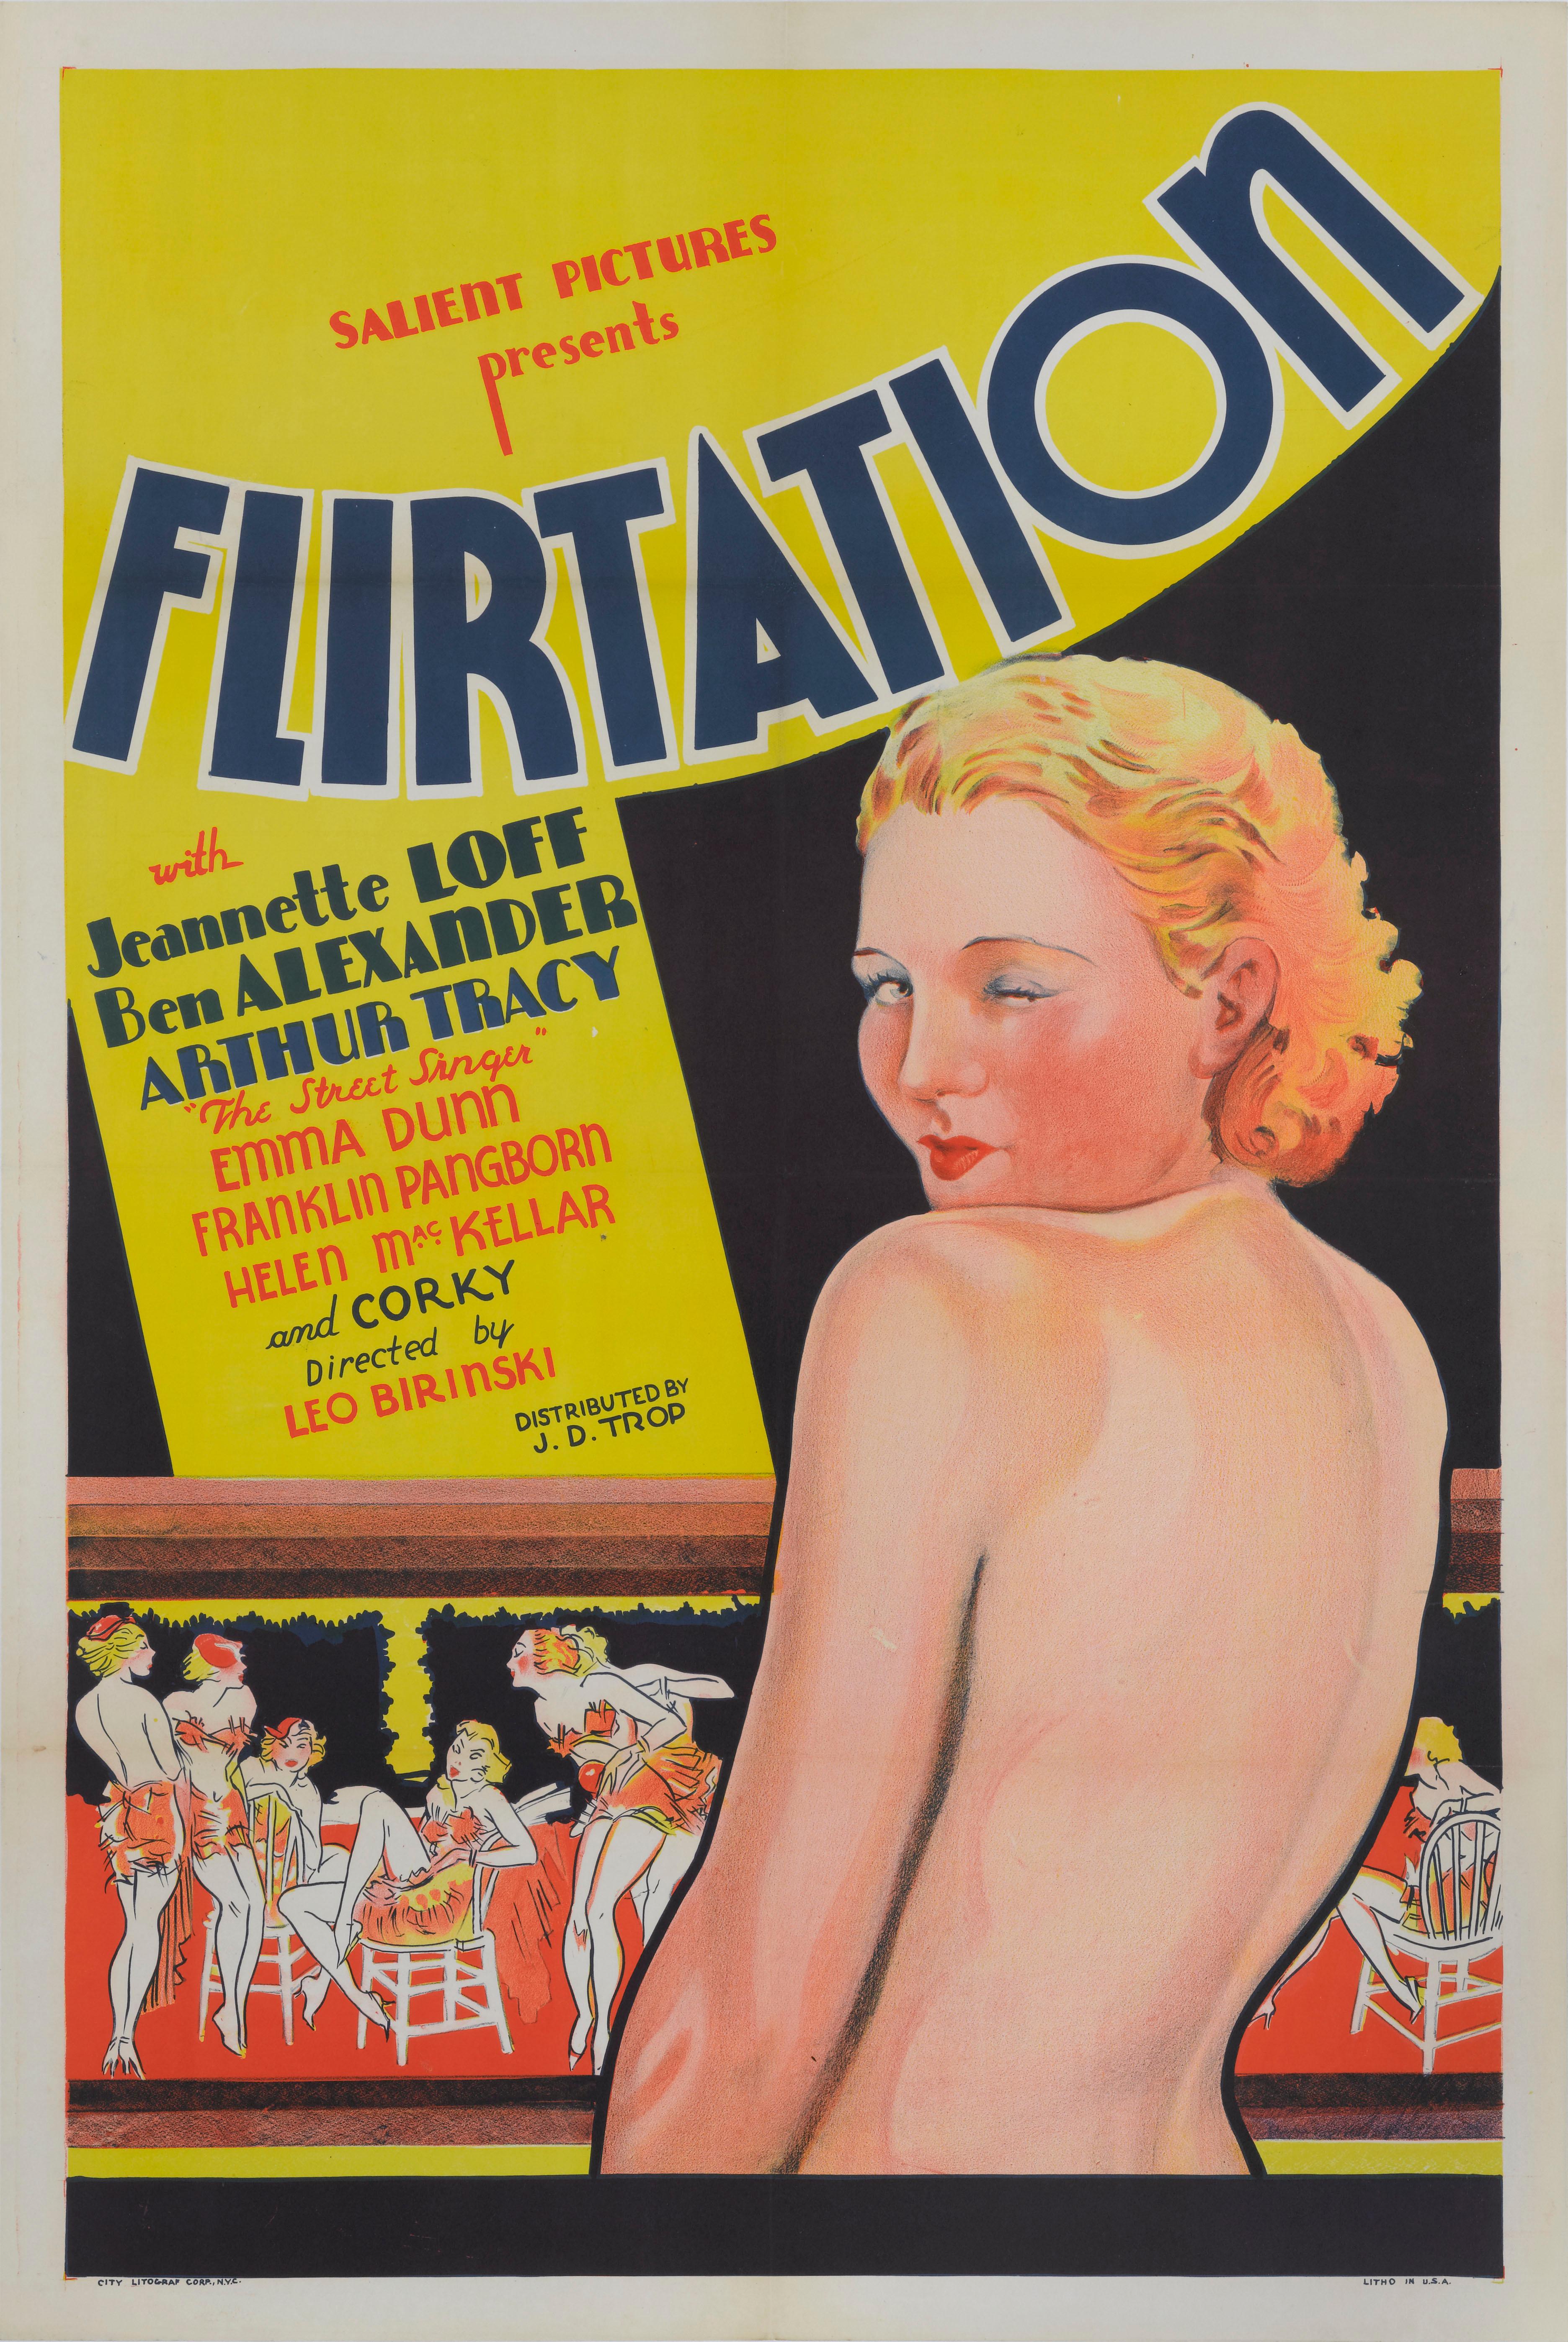 Original US film poster for the 1934 Musical Romance.
This saucy poster showing a naked Jeanette Loff just snuck in before the Hays Code (moral guidelines for films) was fully enforced later on in 1934. The poster is very much of the 1930s era with